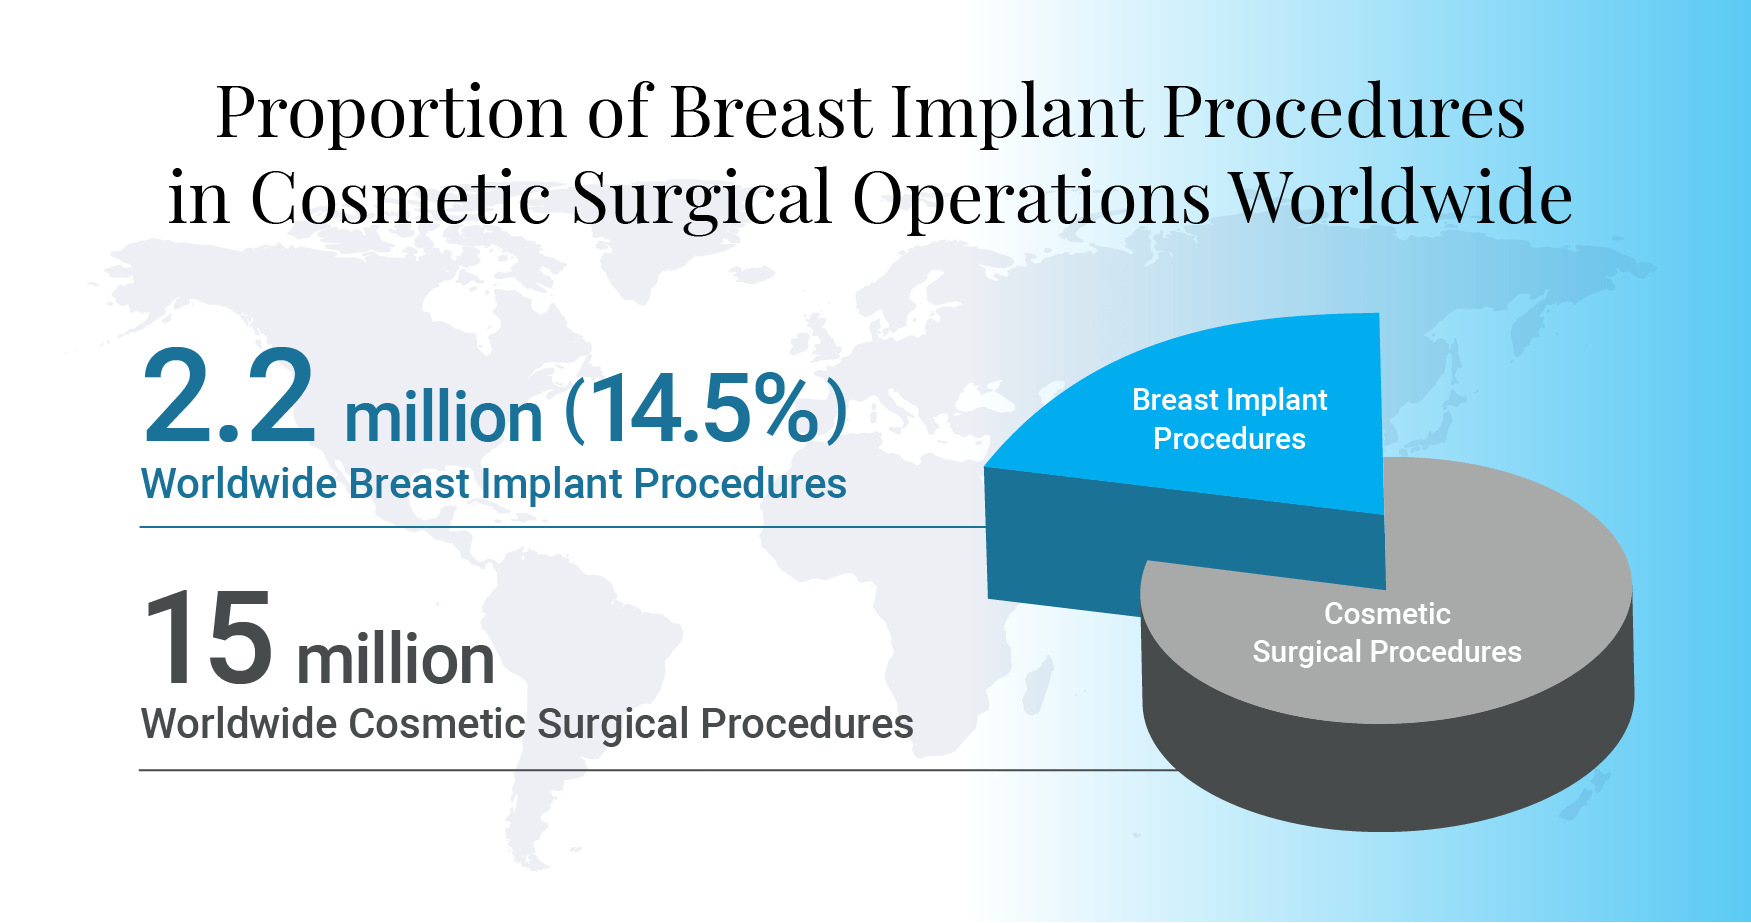 Proportion of Breast Implant Procedures in Cosmetic Surgical Operations Worldwide.